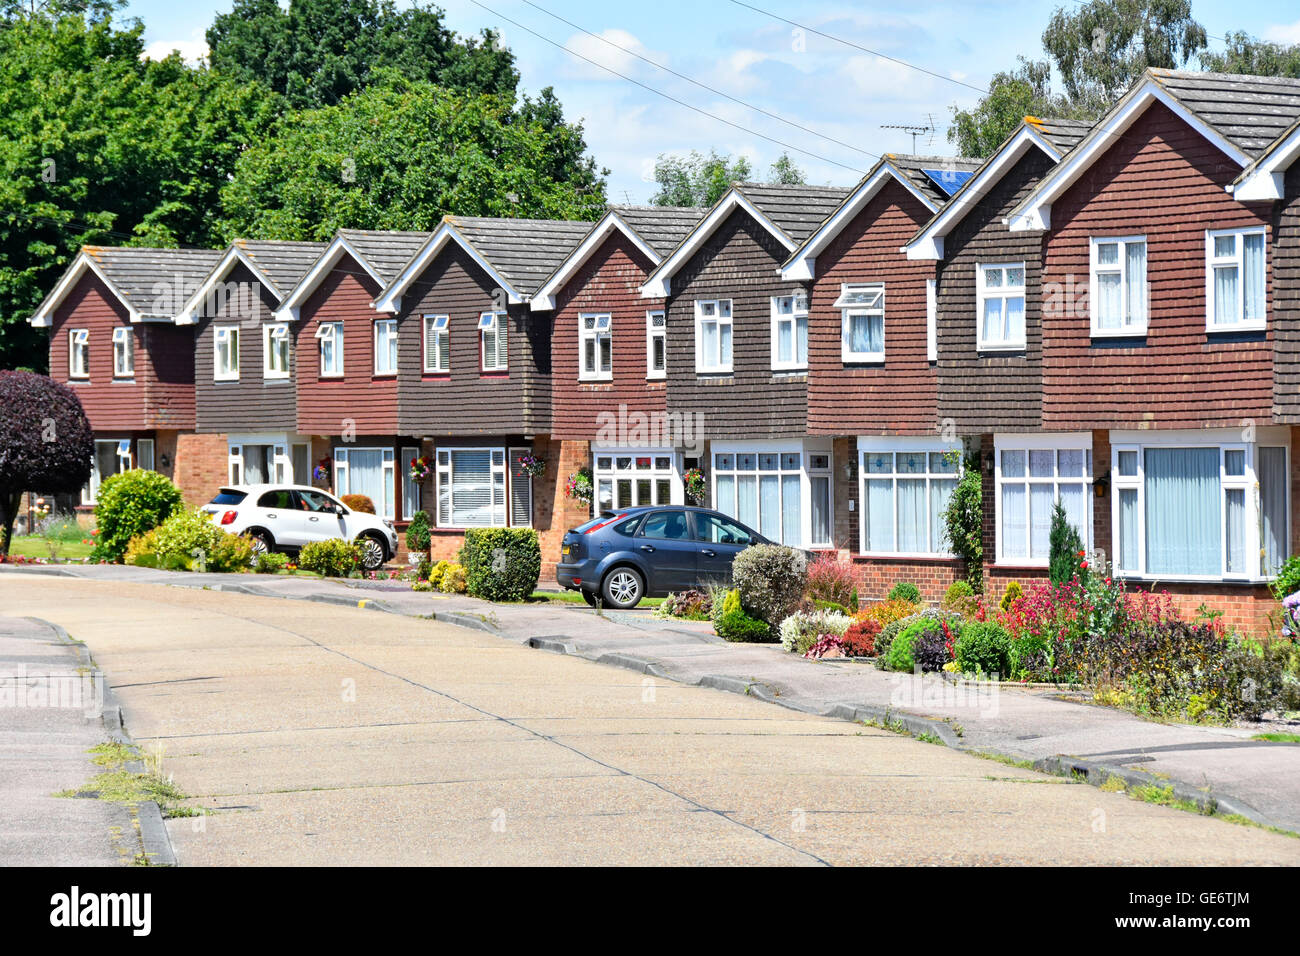 Row of homes in residential street of real estate housing property development identical detached houses individual gardens & car driveway England UK Stock Photo